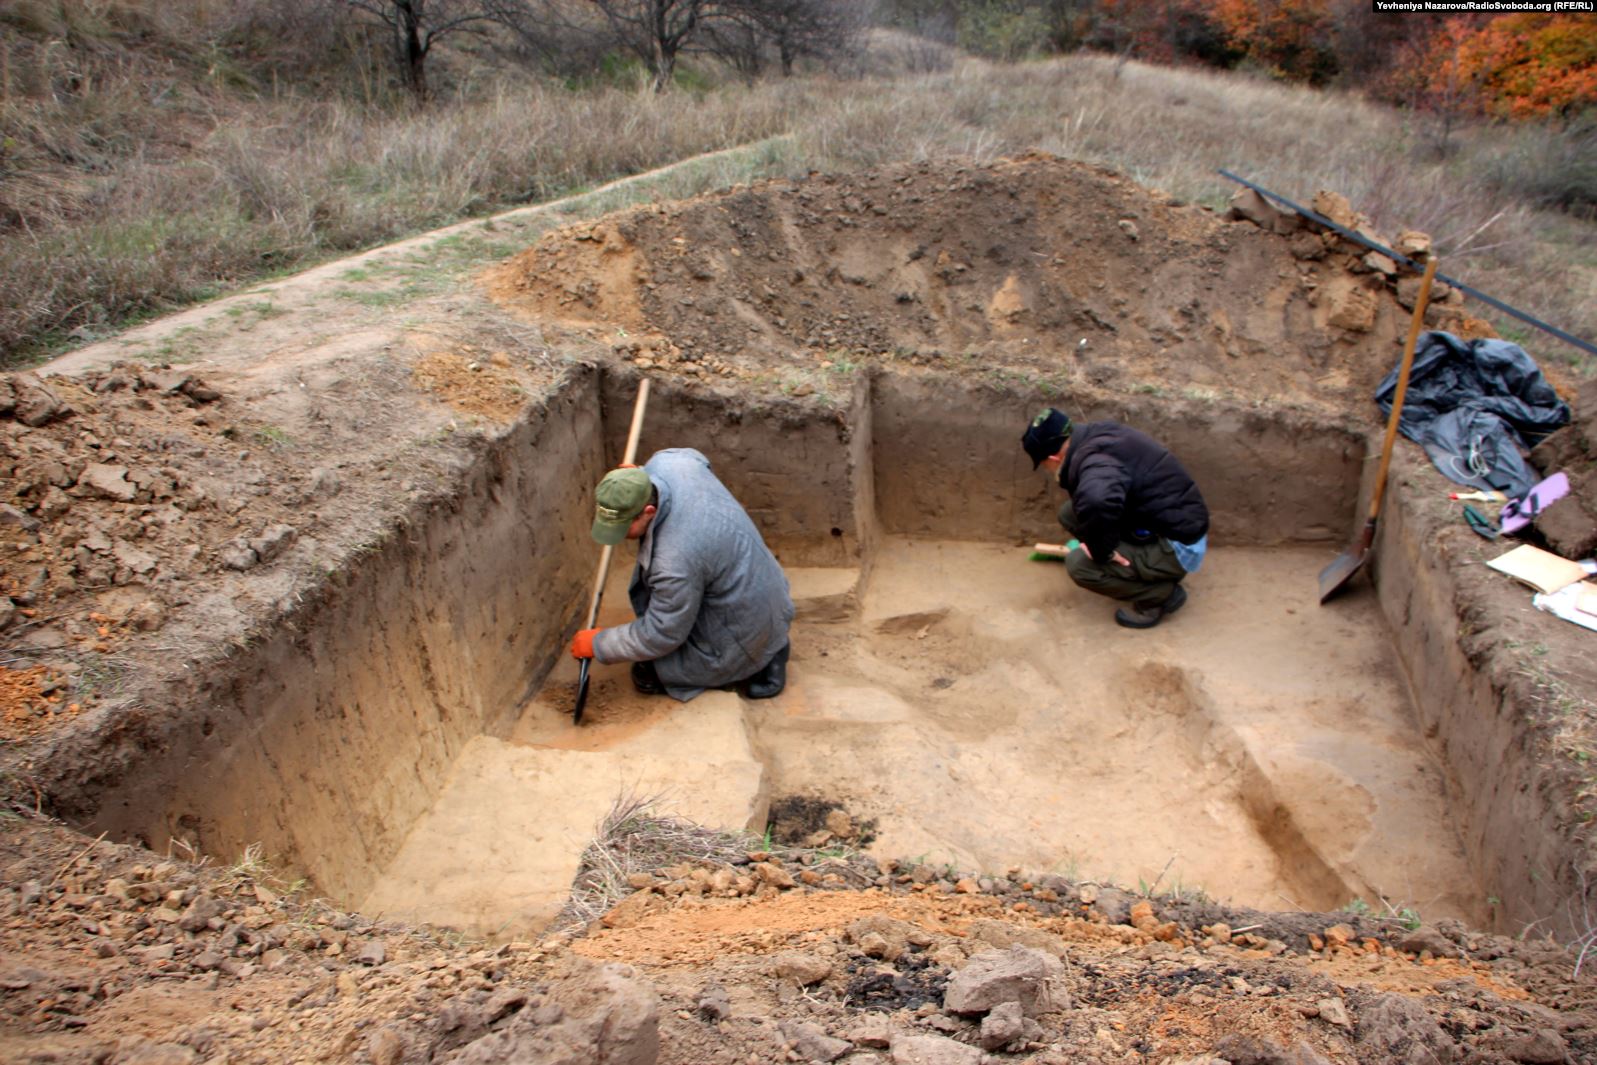 Sensational find on Khortytsia reveals the remains of an 18th century Cossack encampment